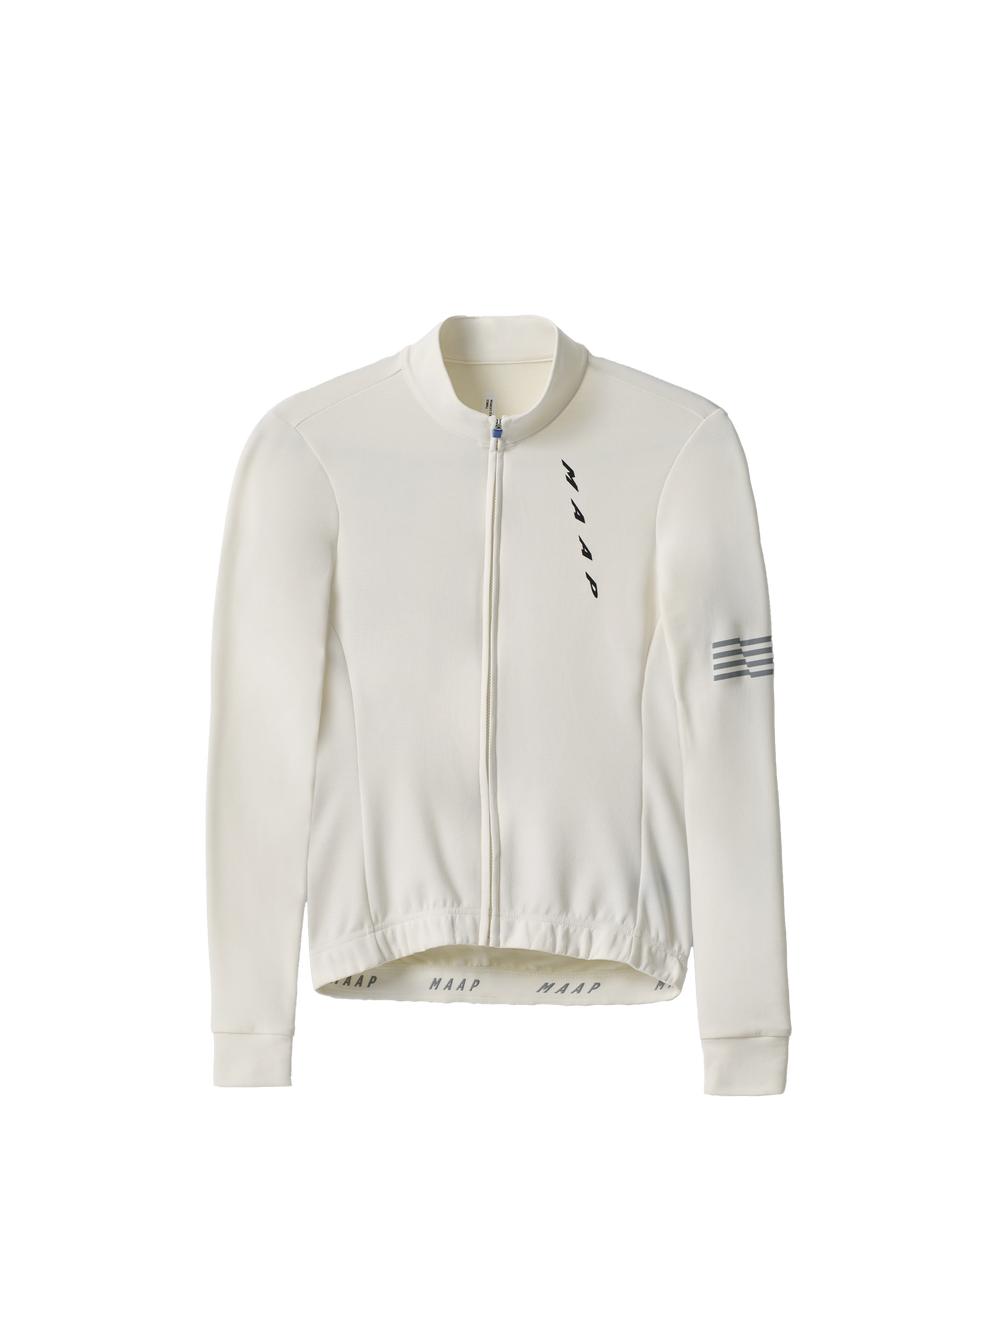 Product Image for Women's Embark Team LS Jersey